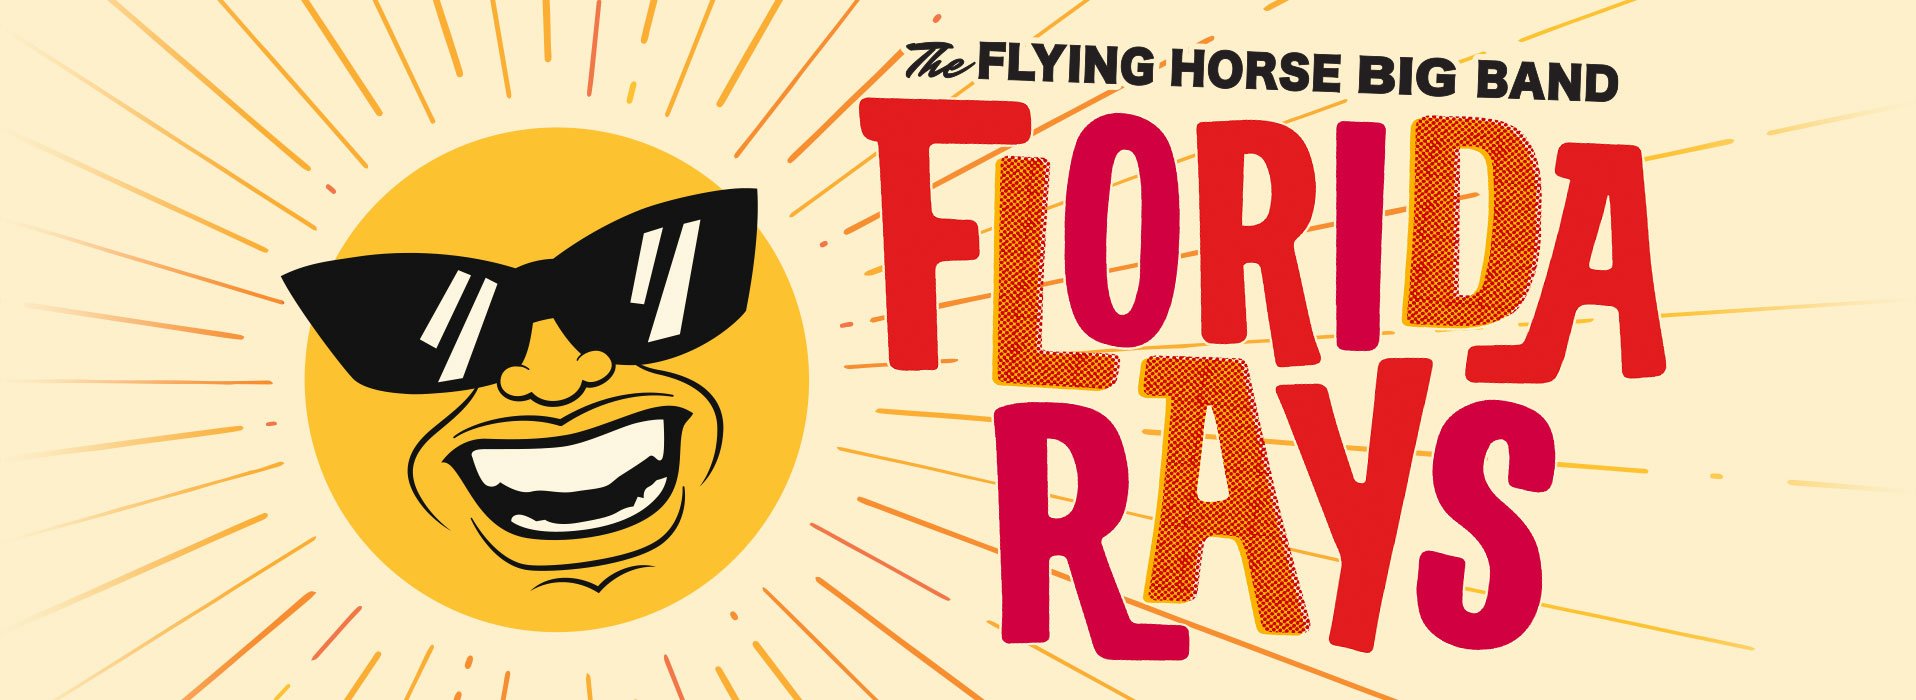 The Flying Horse Big Band, Florida Rays with illustration of smiling sun